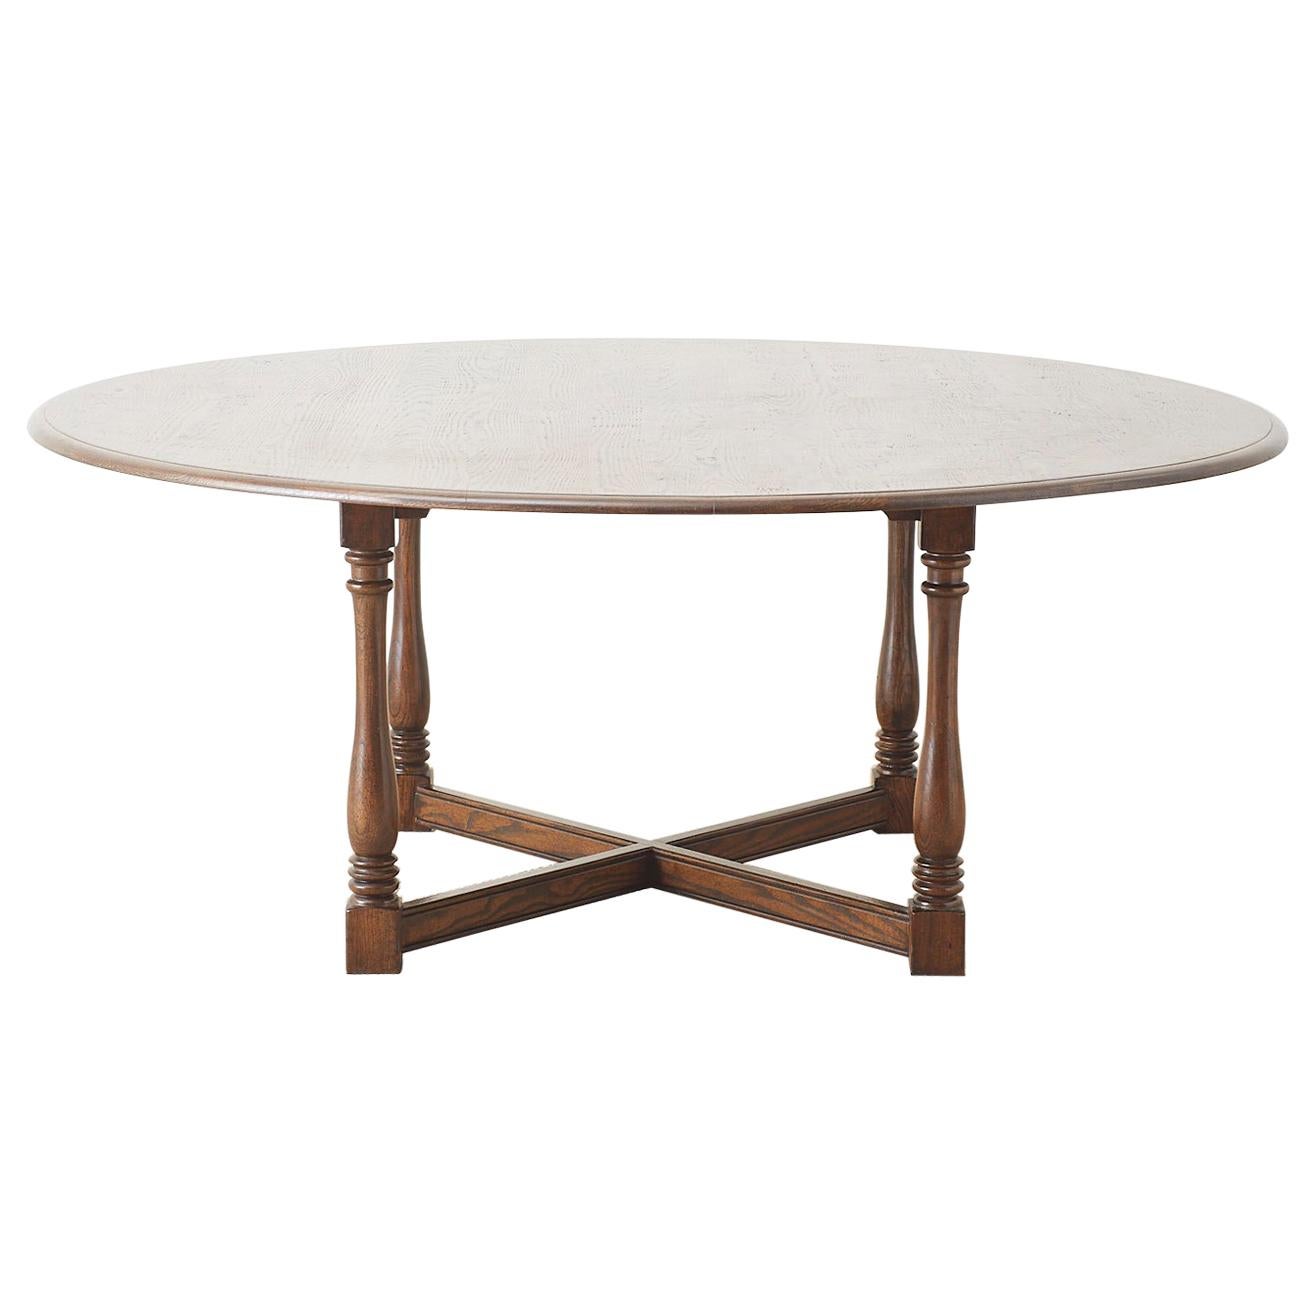 English Country Style Round Oak Dining Table